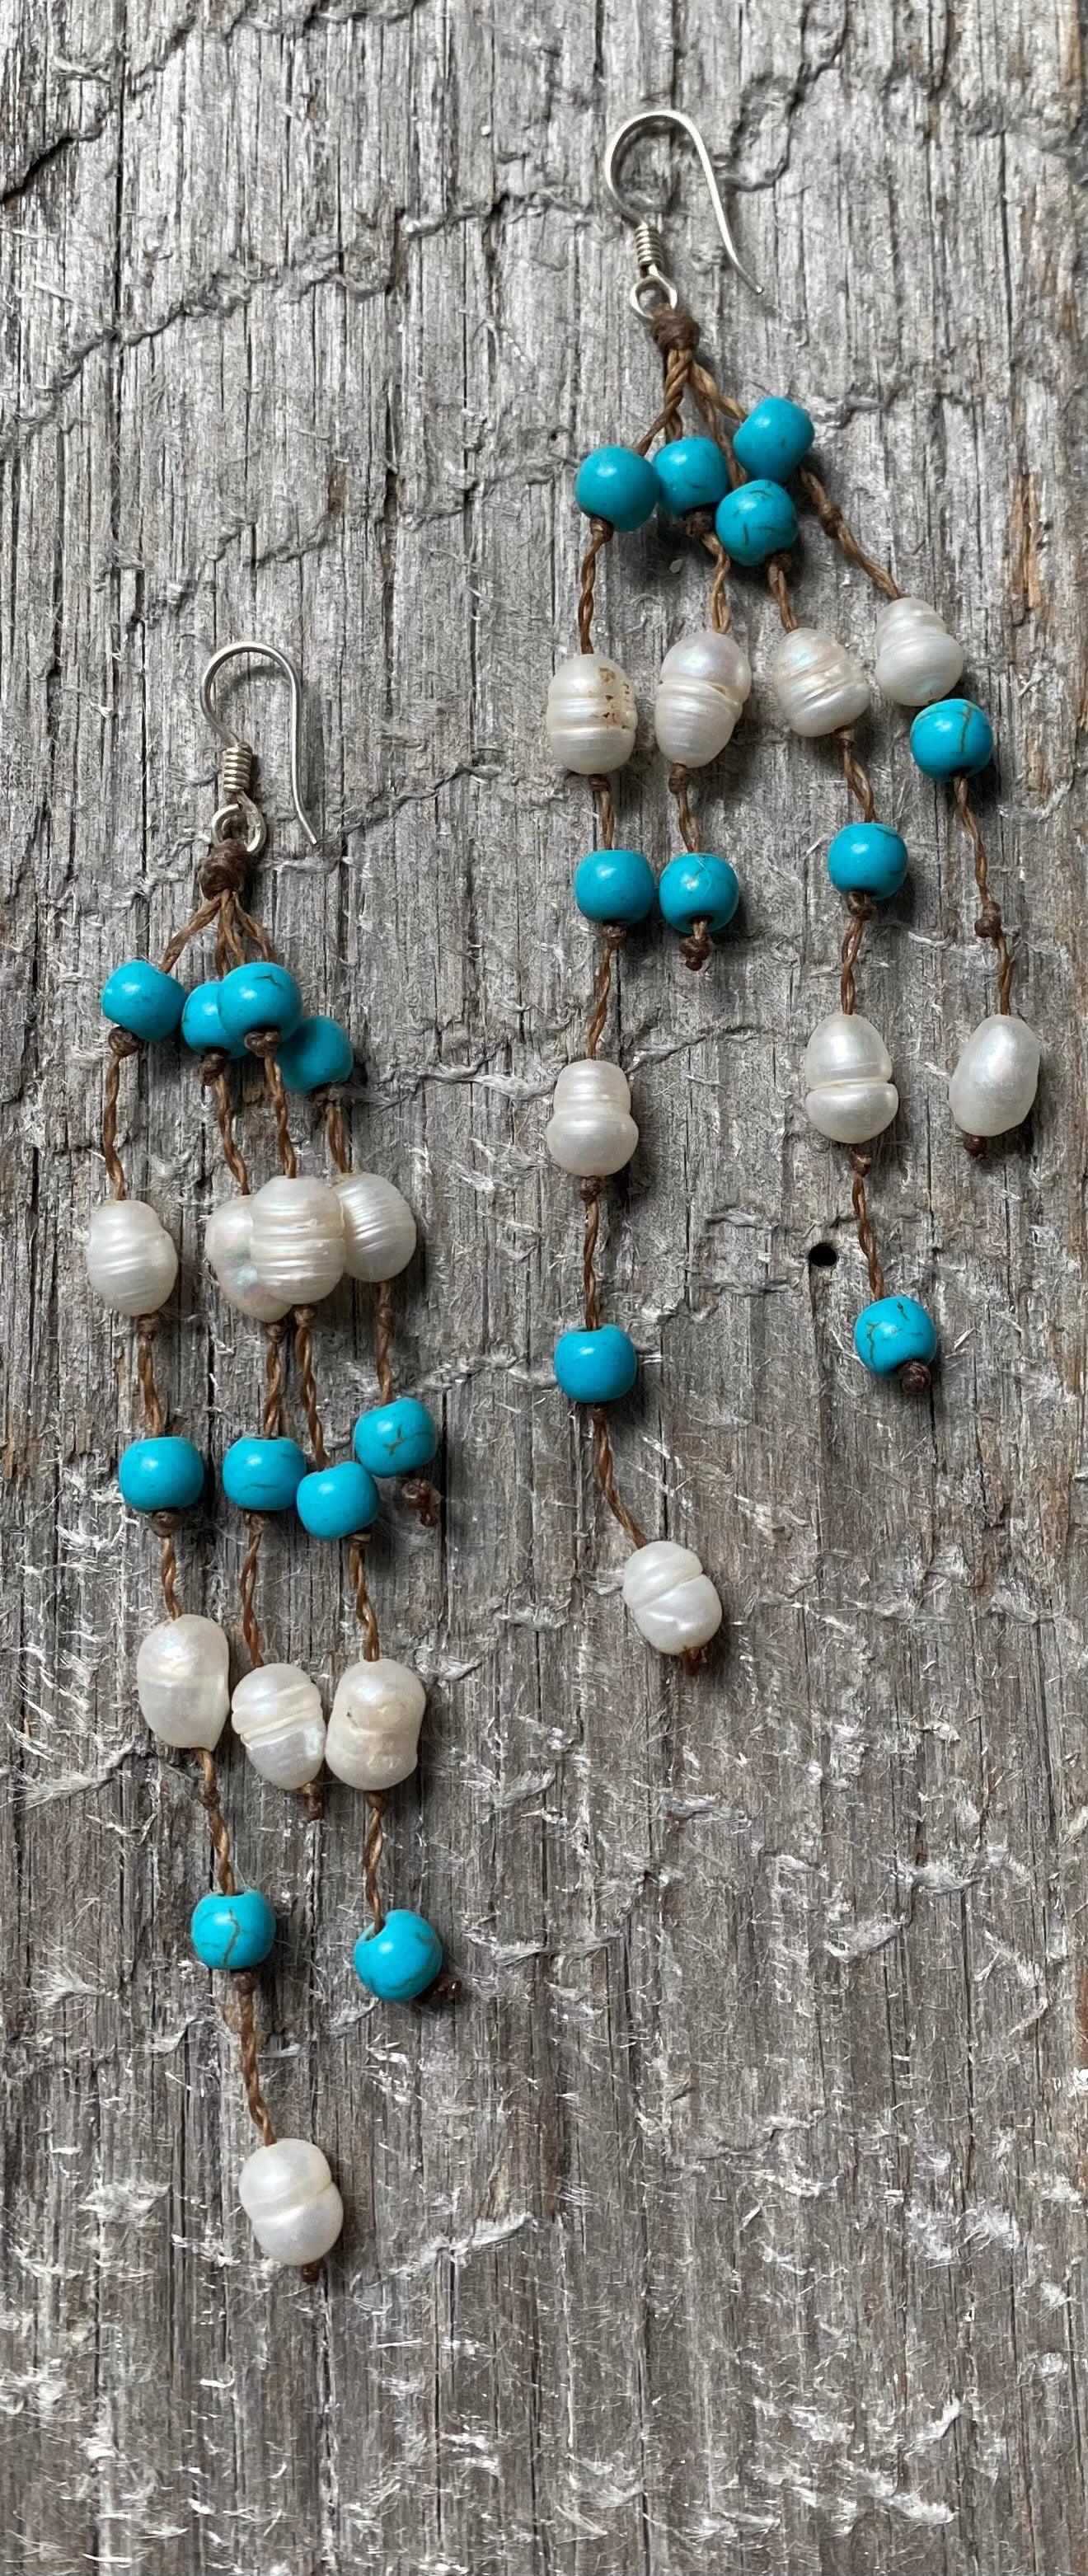 Earrings freshwater pearl  turquoise beads tan leather with sterling silver hook - STUNNING!